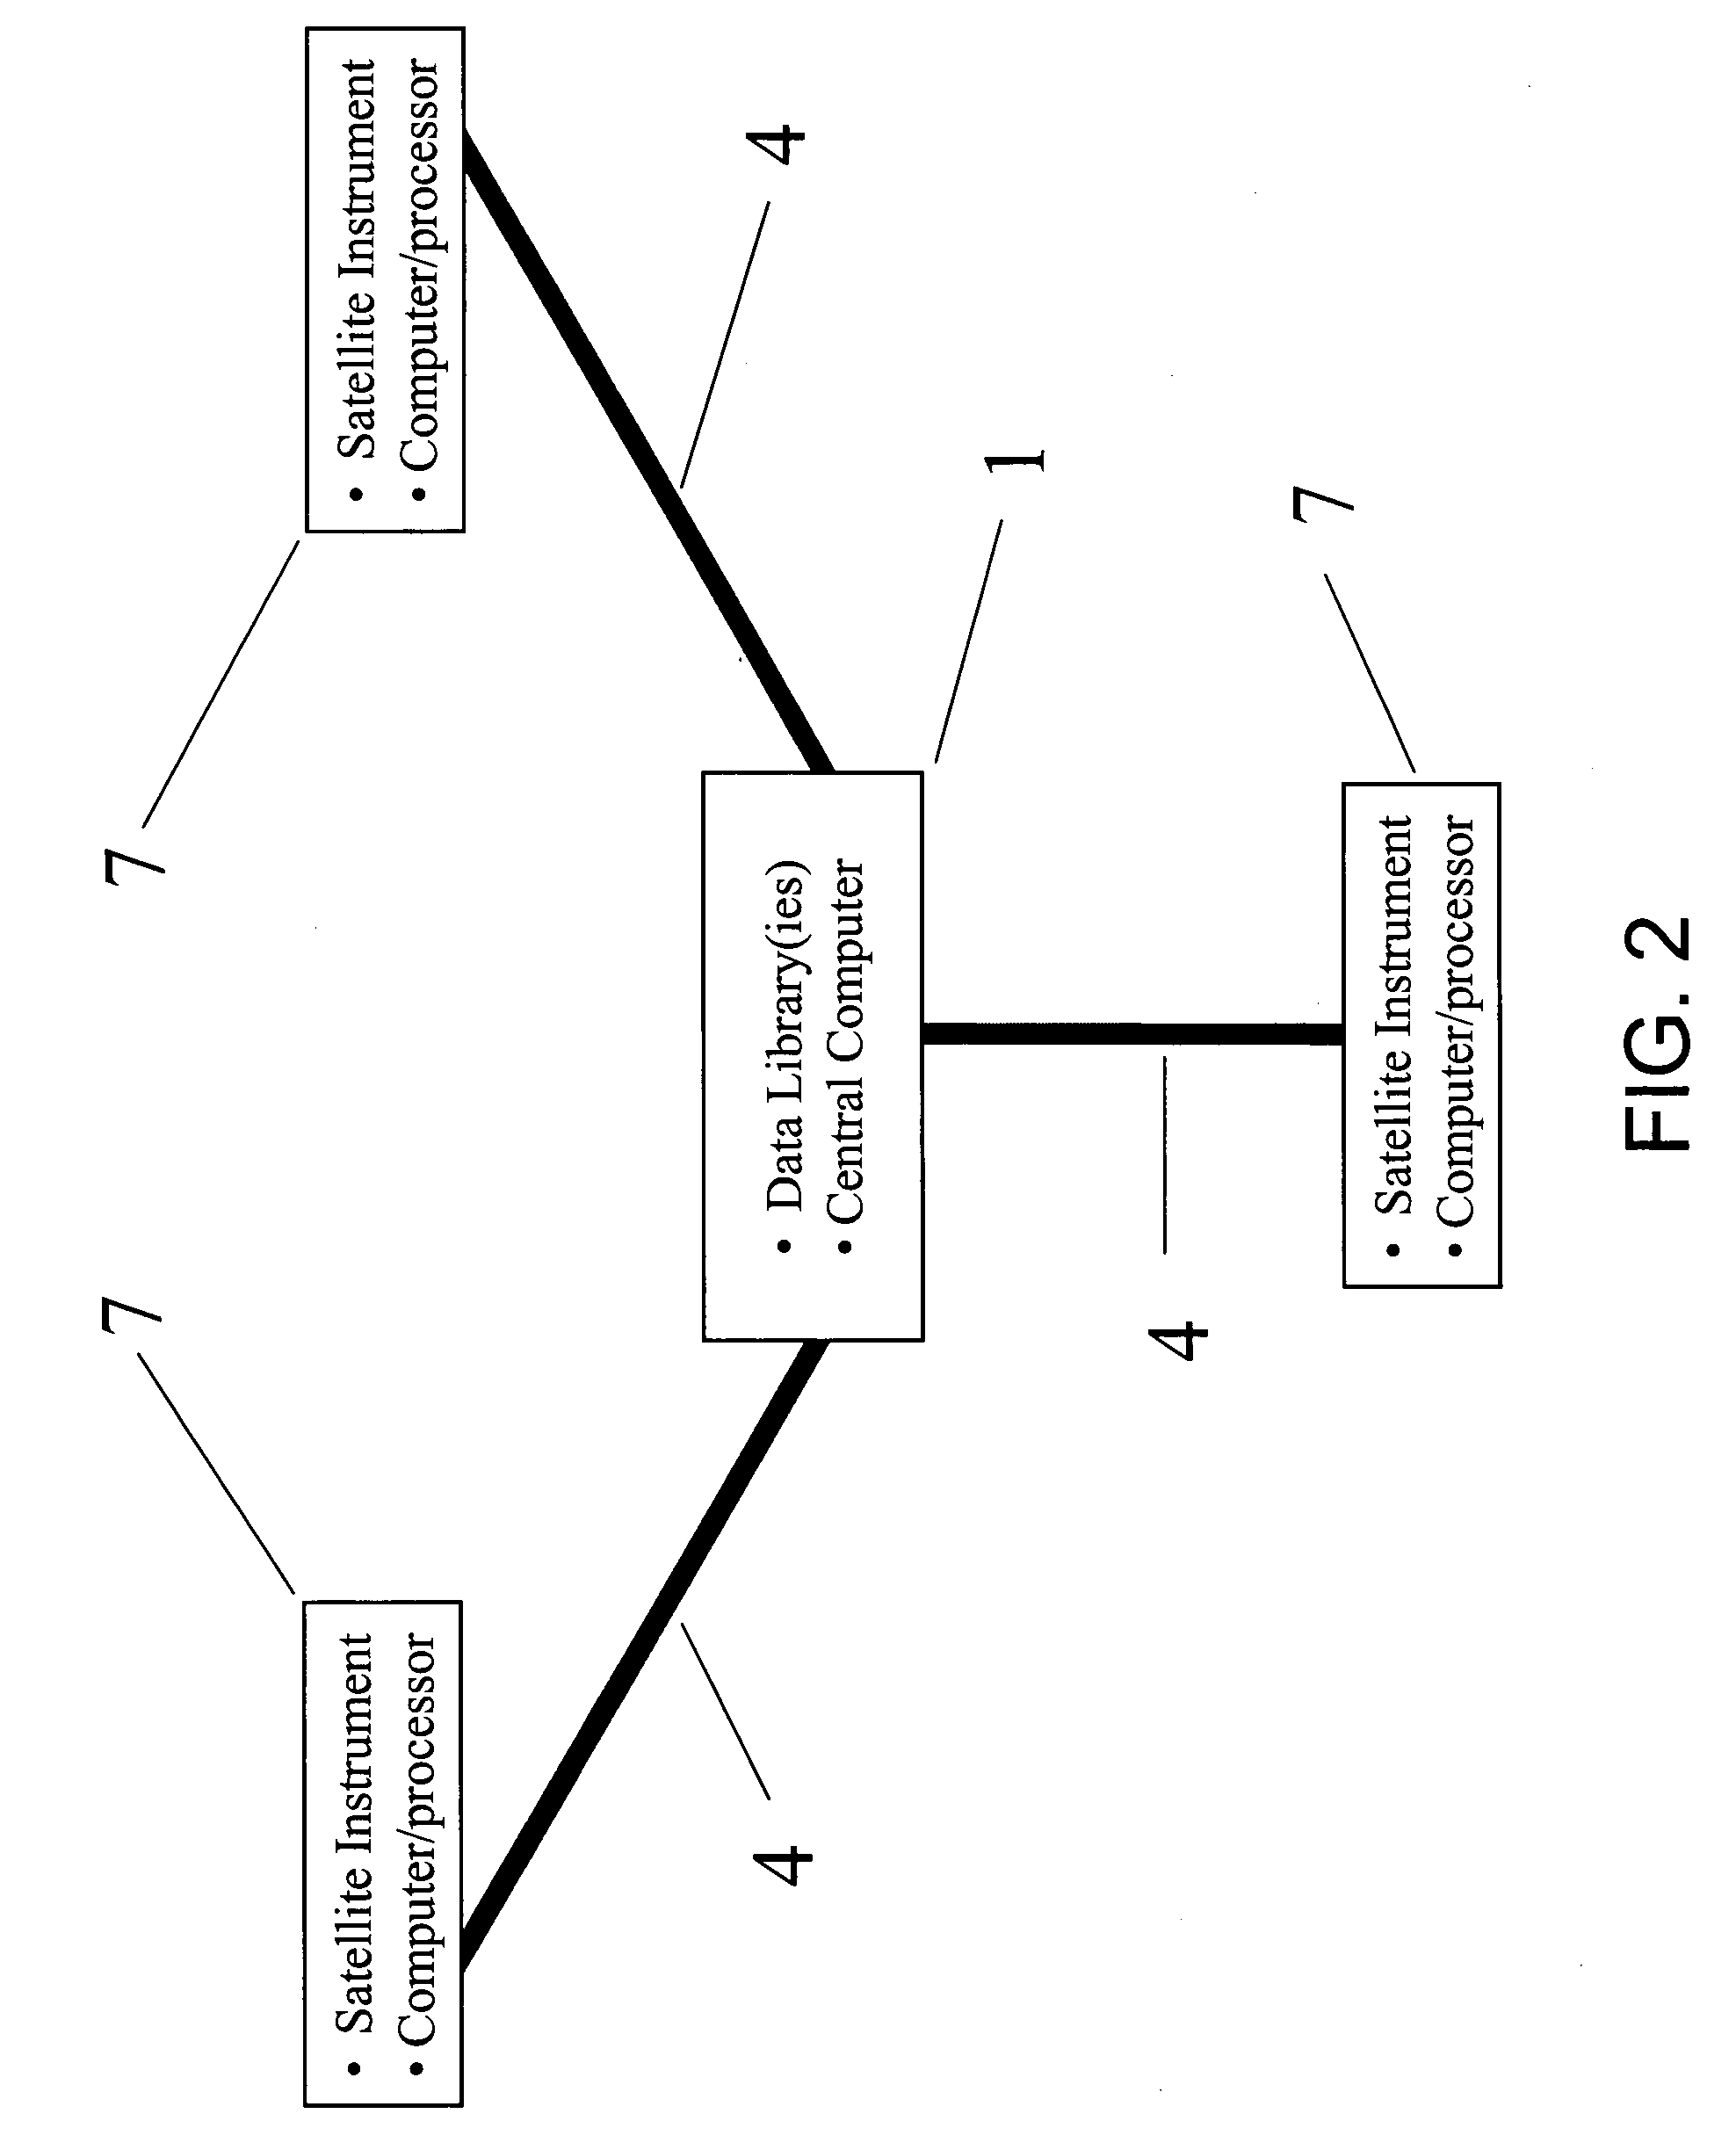 Database and method of use for authenticity verification of pharmaceuticals